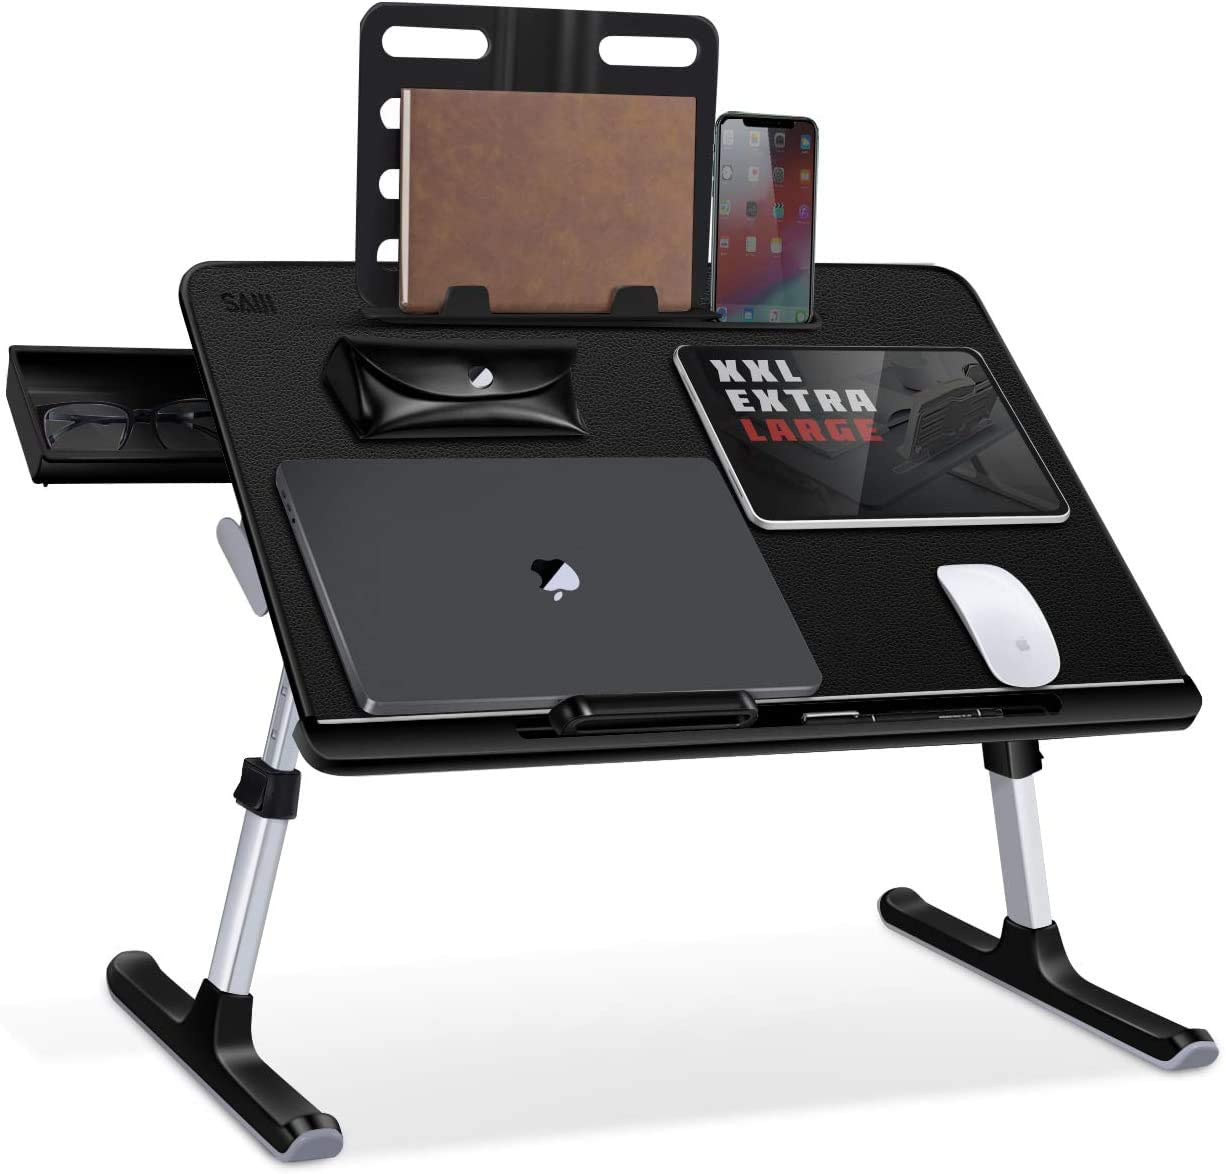 Laptop Bed Tray Desk Adjustable Laptop Stand for Bed, Foldable Laptop Table with Storage Drawer for Eating, Working, Writing, Gaming, Drawing